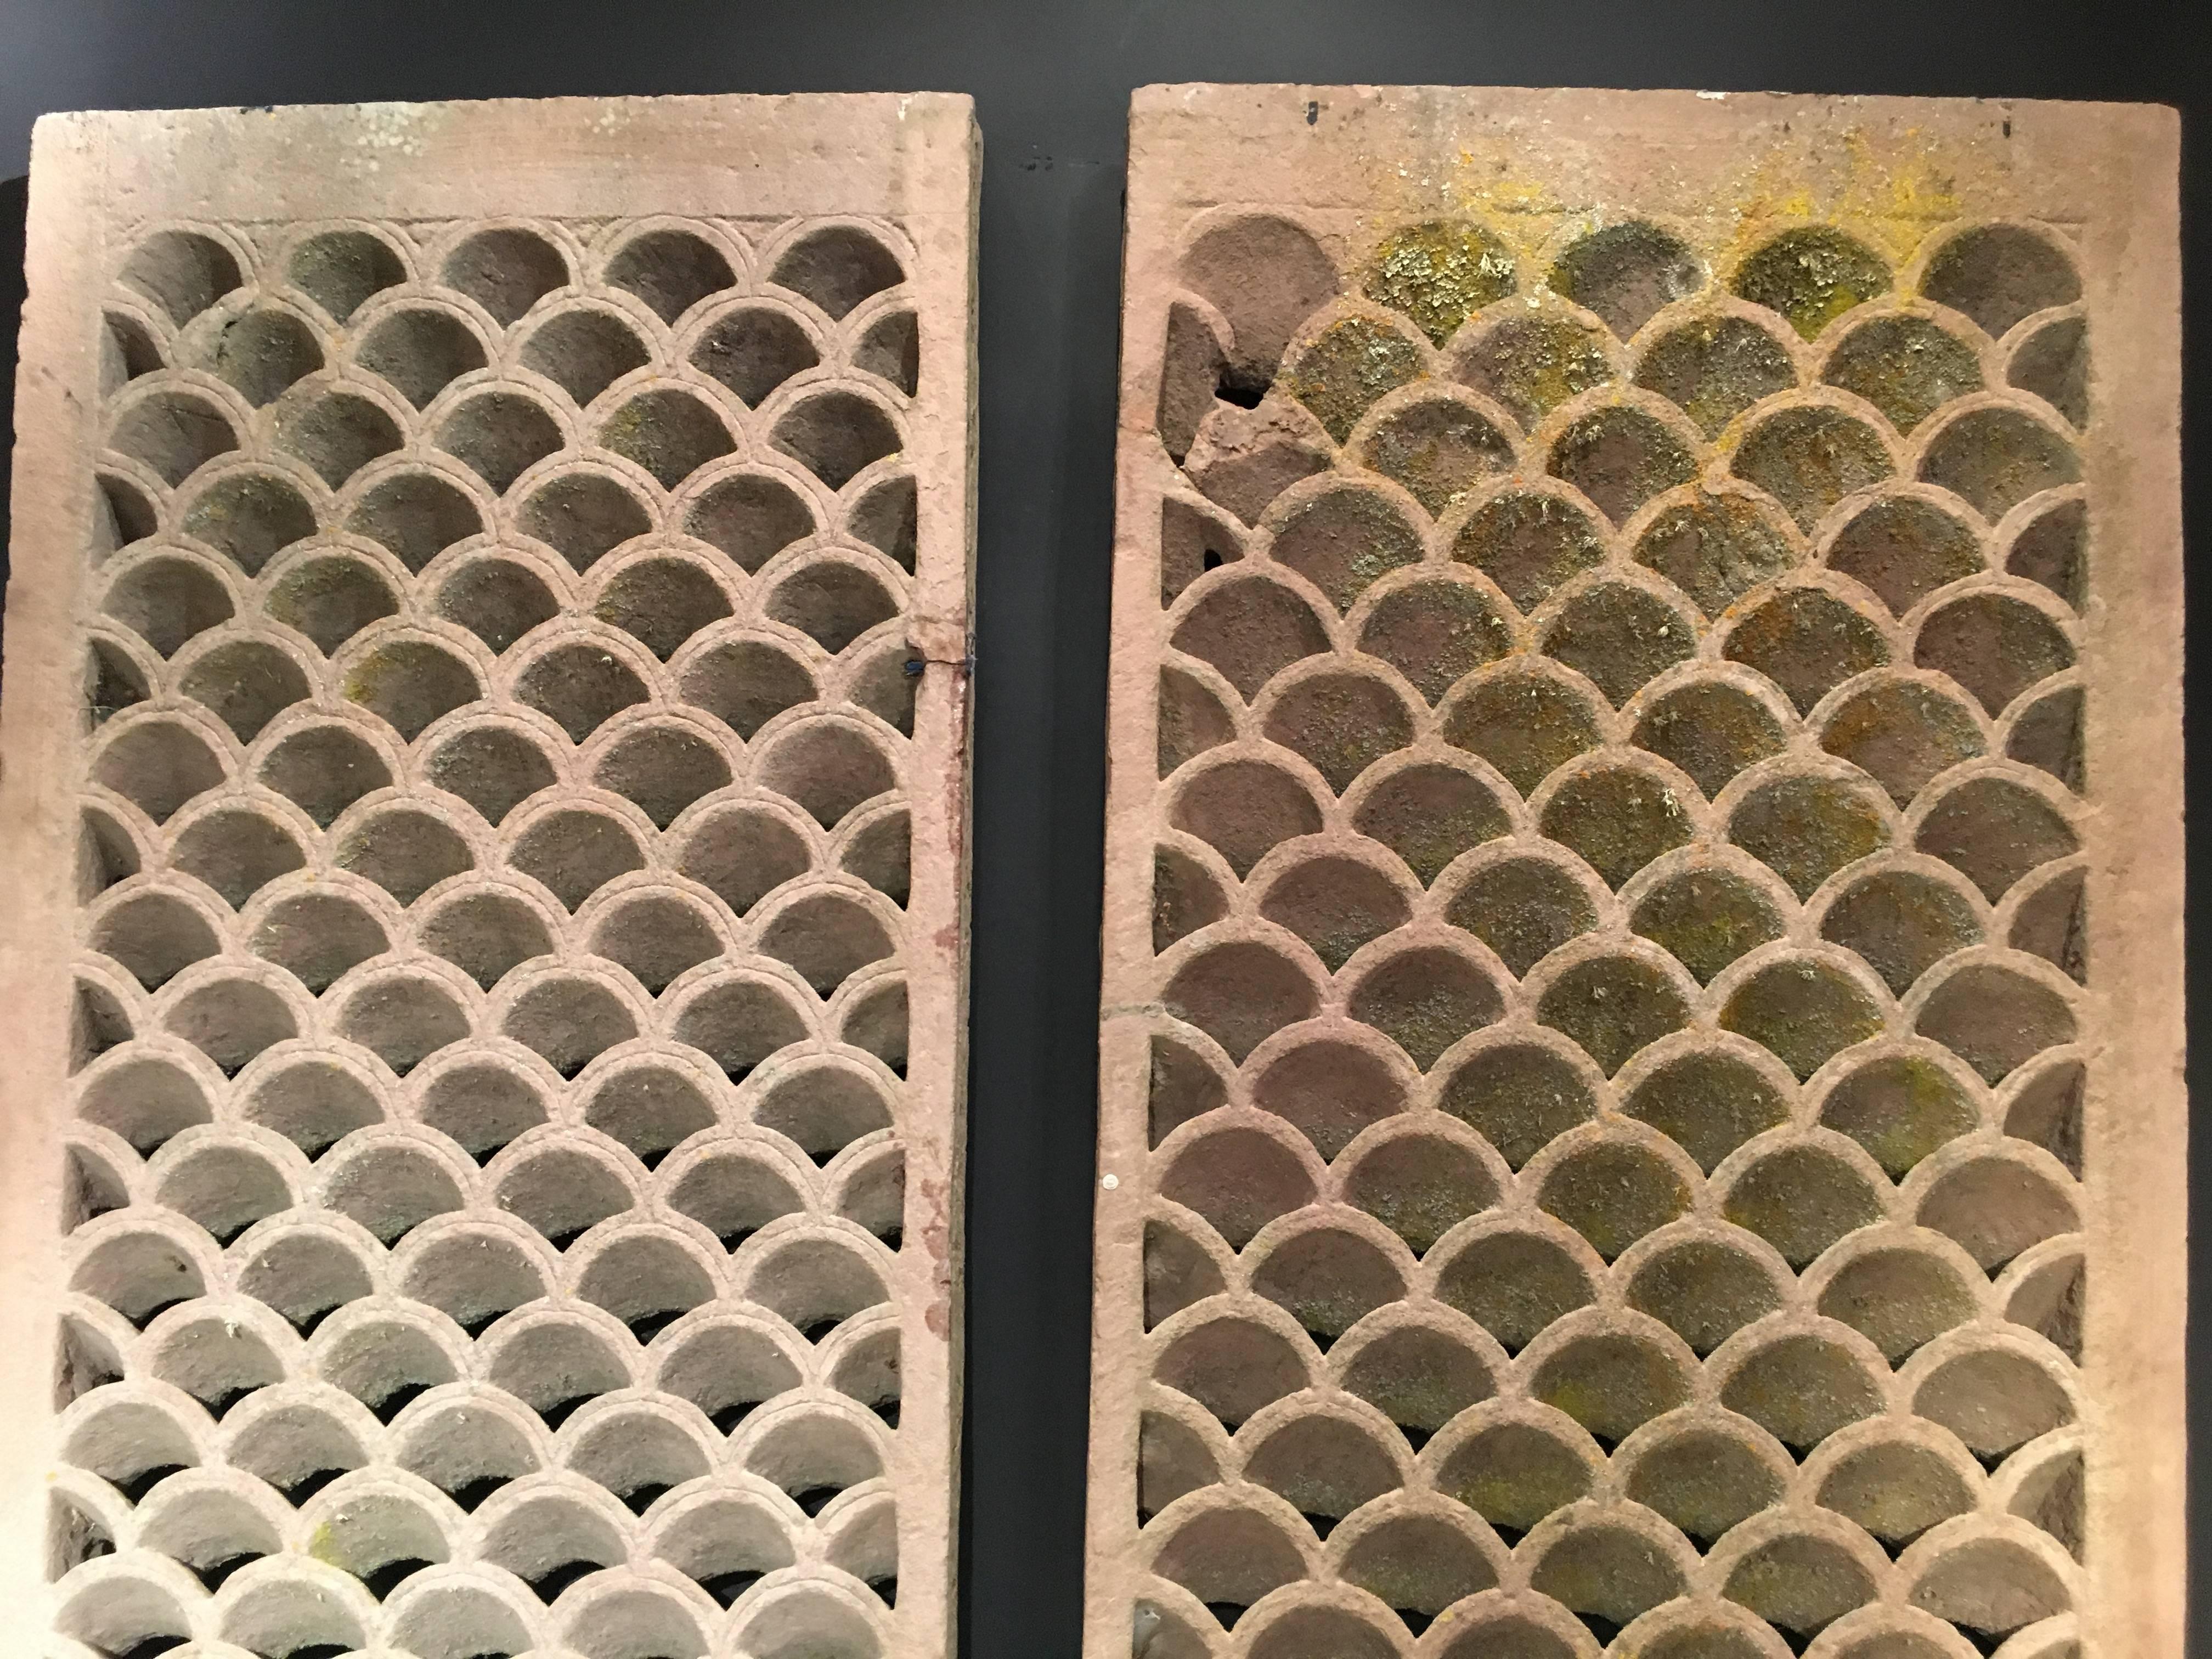 A stunning pair of Indian sandstone jali panels, carved, undercut, and pierced in a fish scale pattern.
Each panel carved from a single slab of sandstone. The scales carved in an overlapping pattern, each scale with an incised line following the